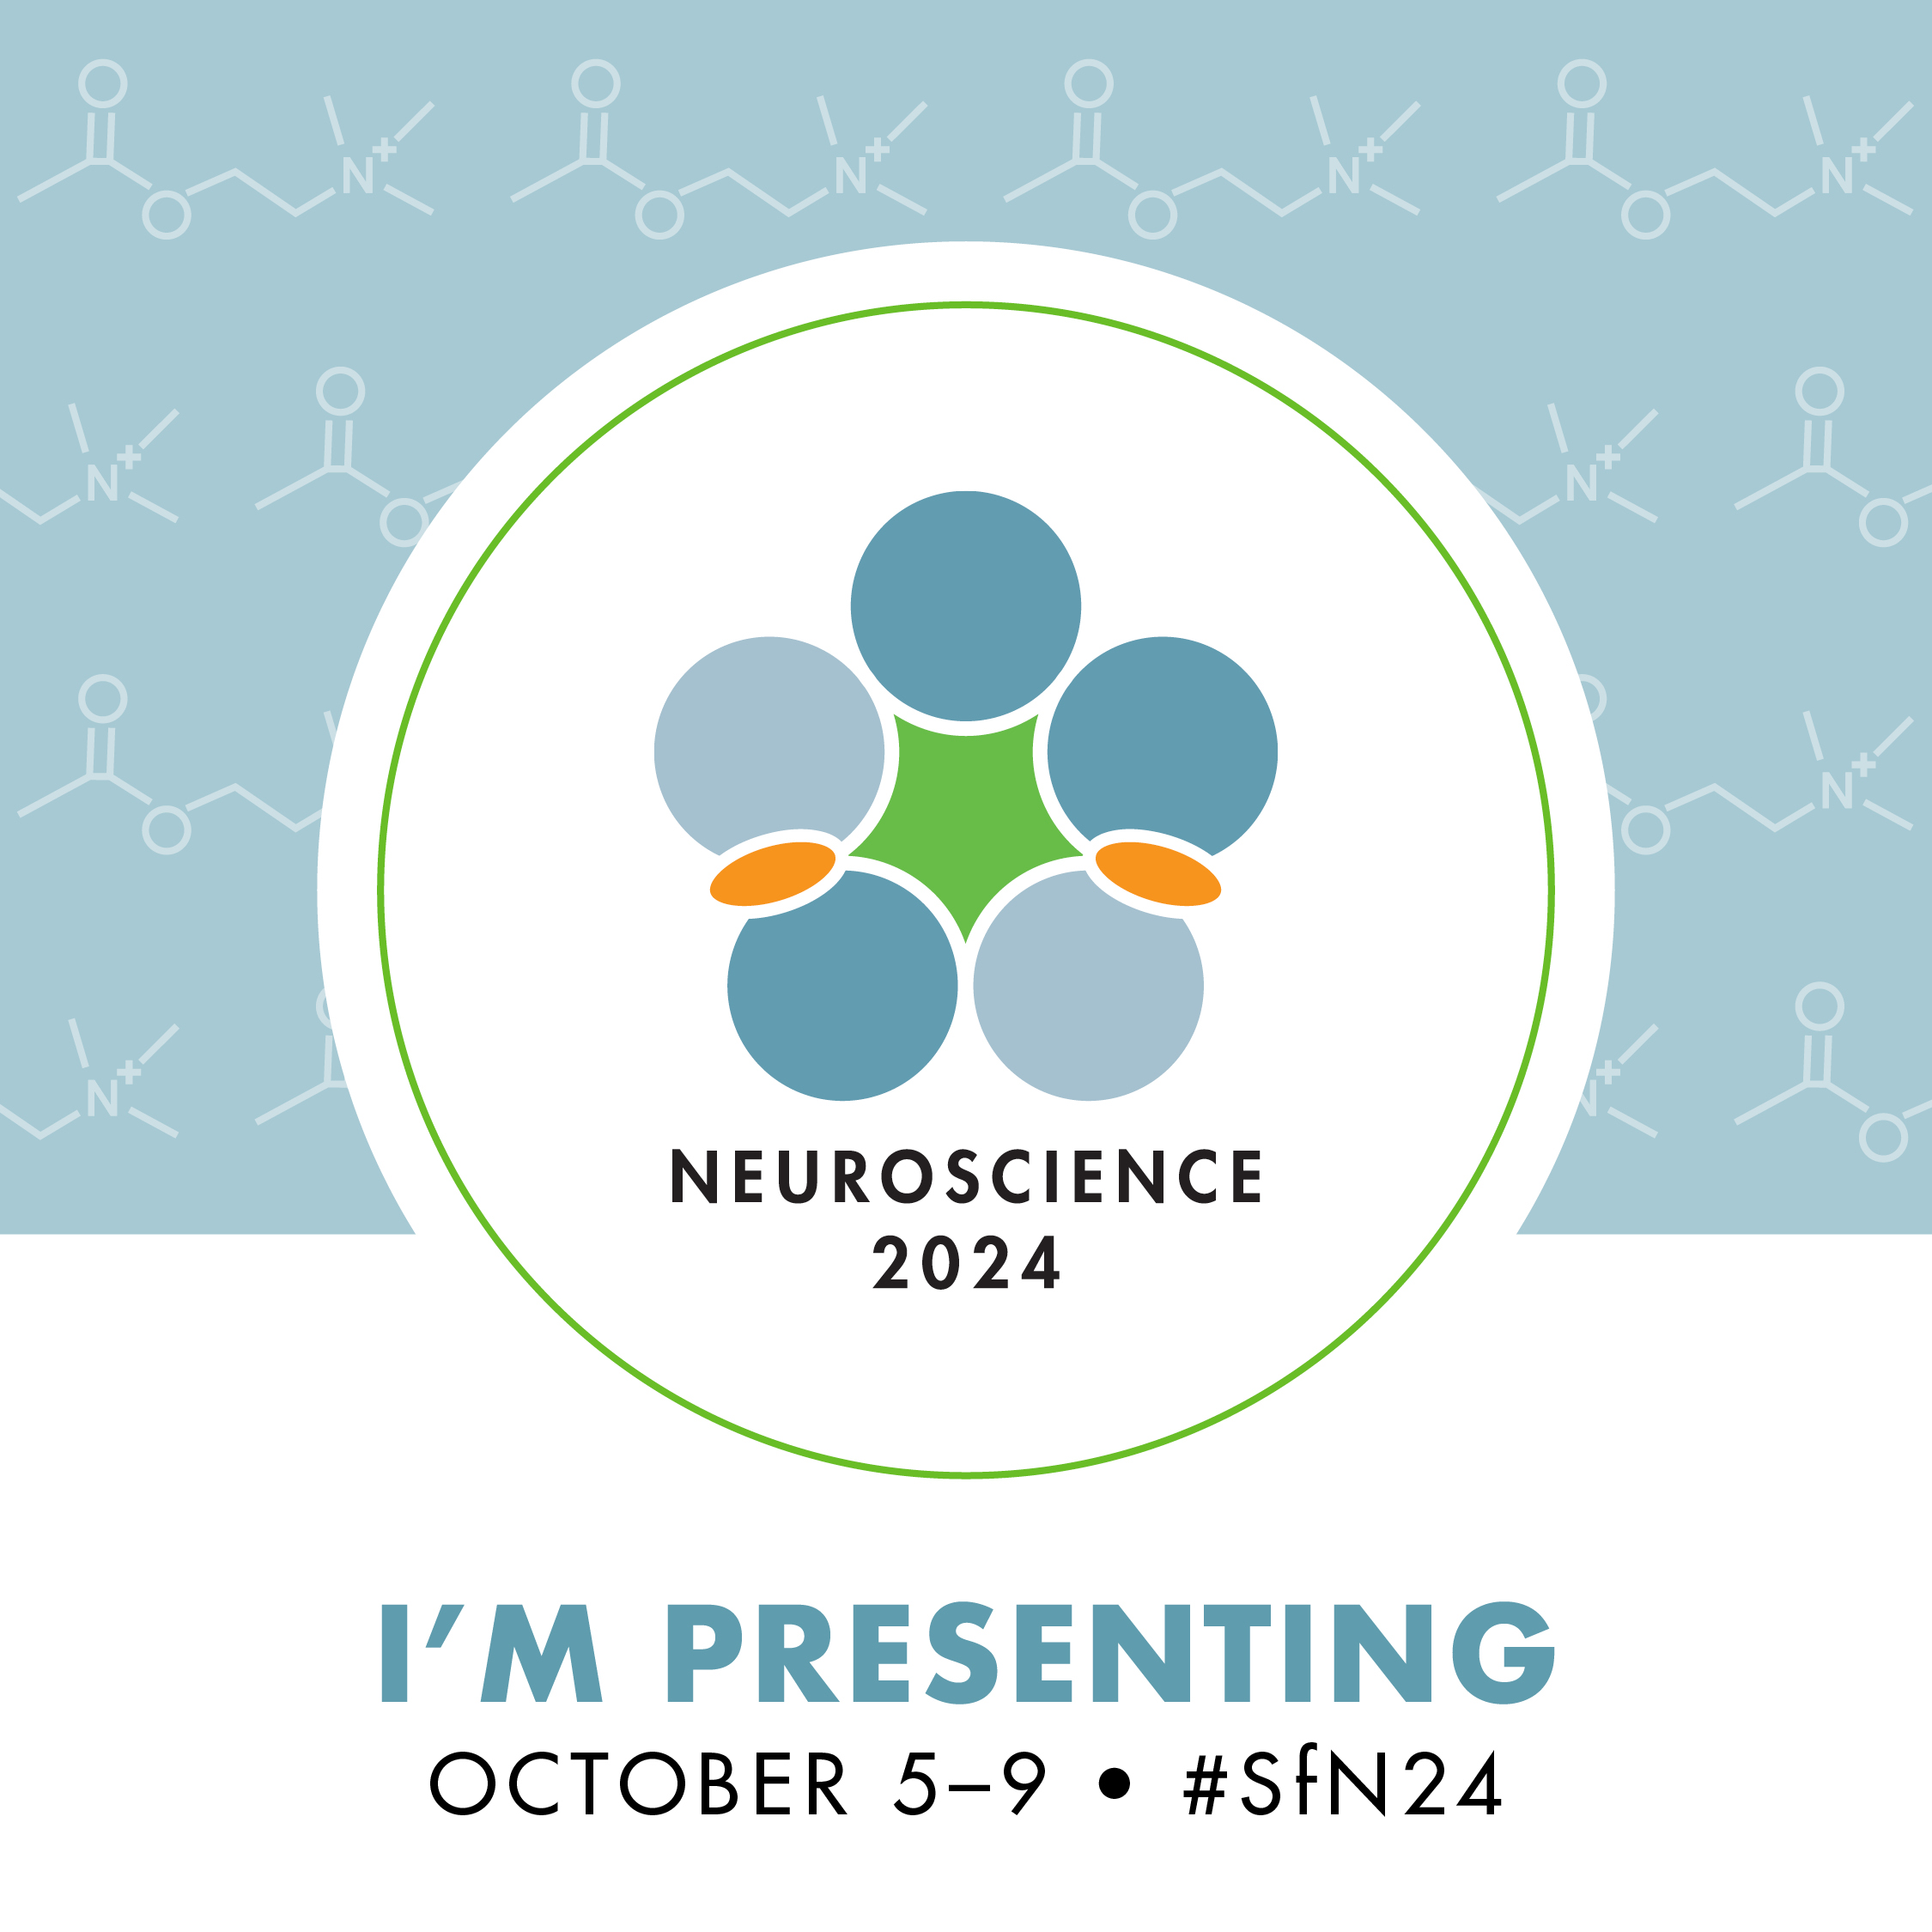 Image that says "I'm Presenting" with the Neuroscience 2024 logo.